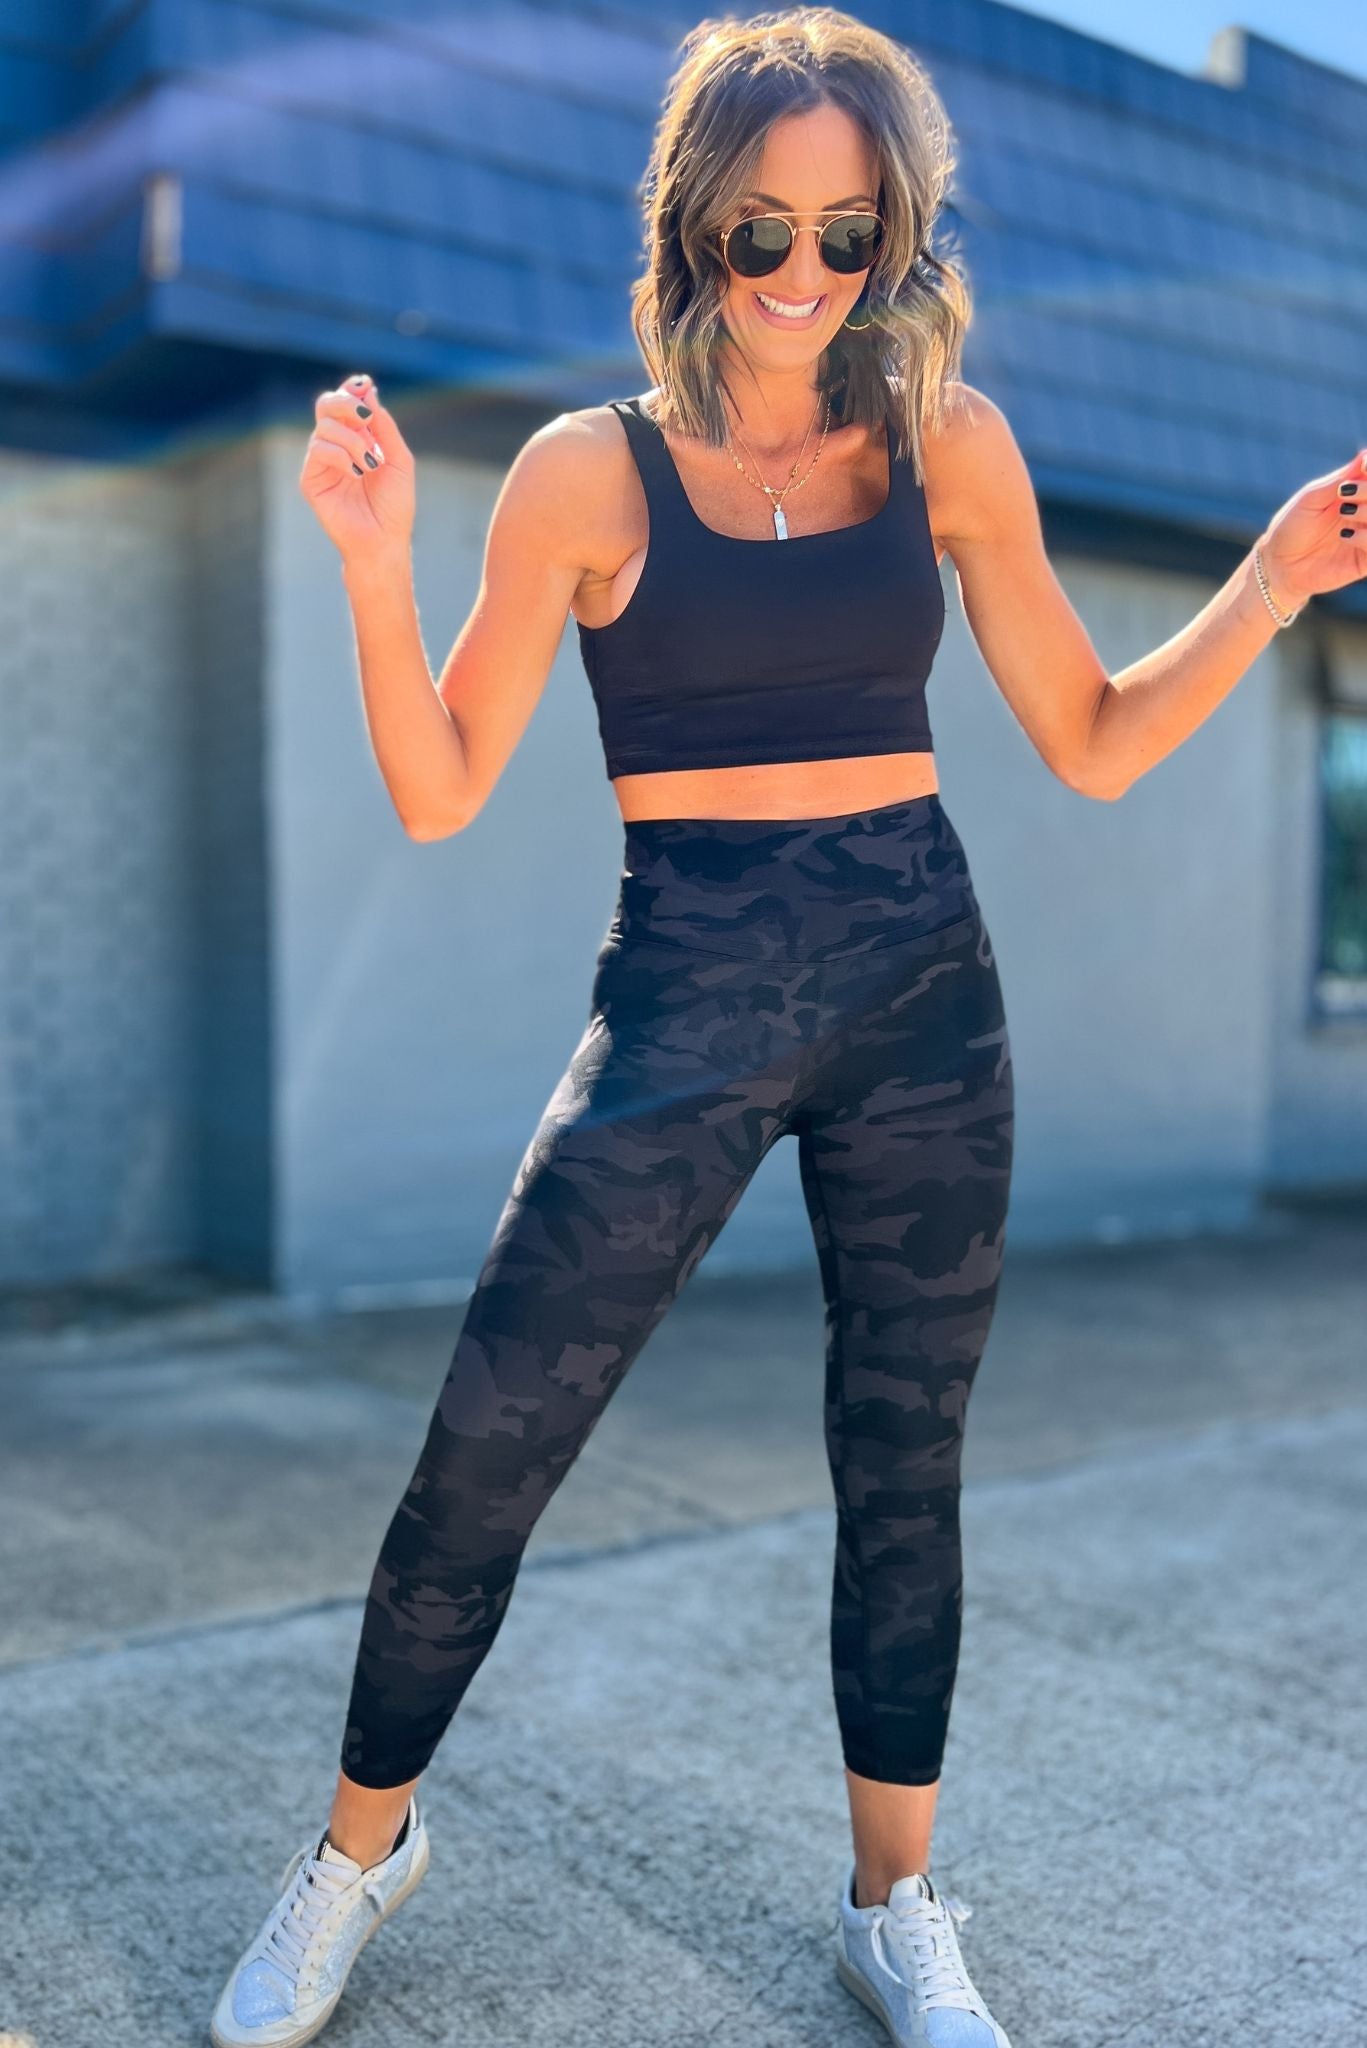 Load image into Gallery viewer, Black Camo Highwaist Seamless LeggingsSSYS The Label, athleisure, everyday wear, mom style, layered look, must have, shop style your senses by mallory fitzsimmons
